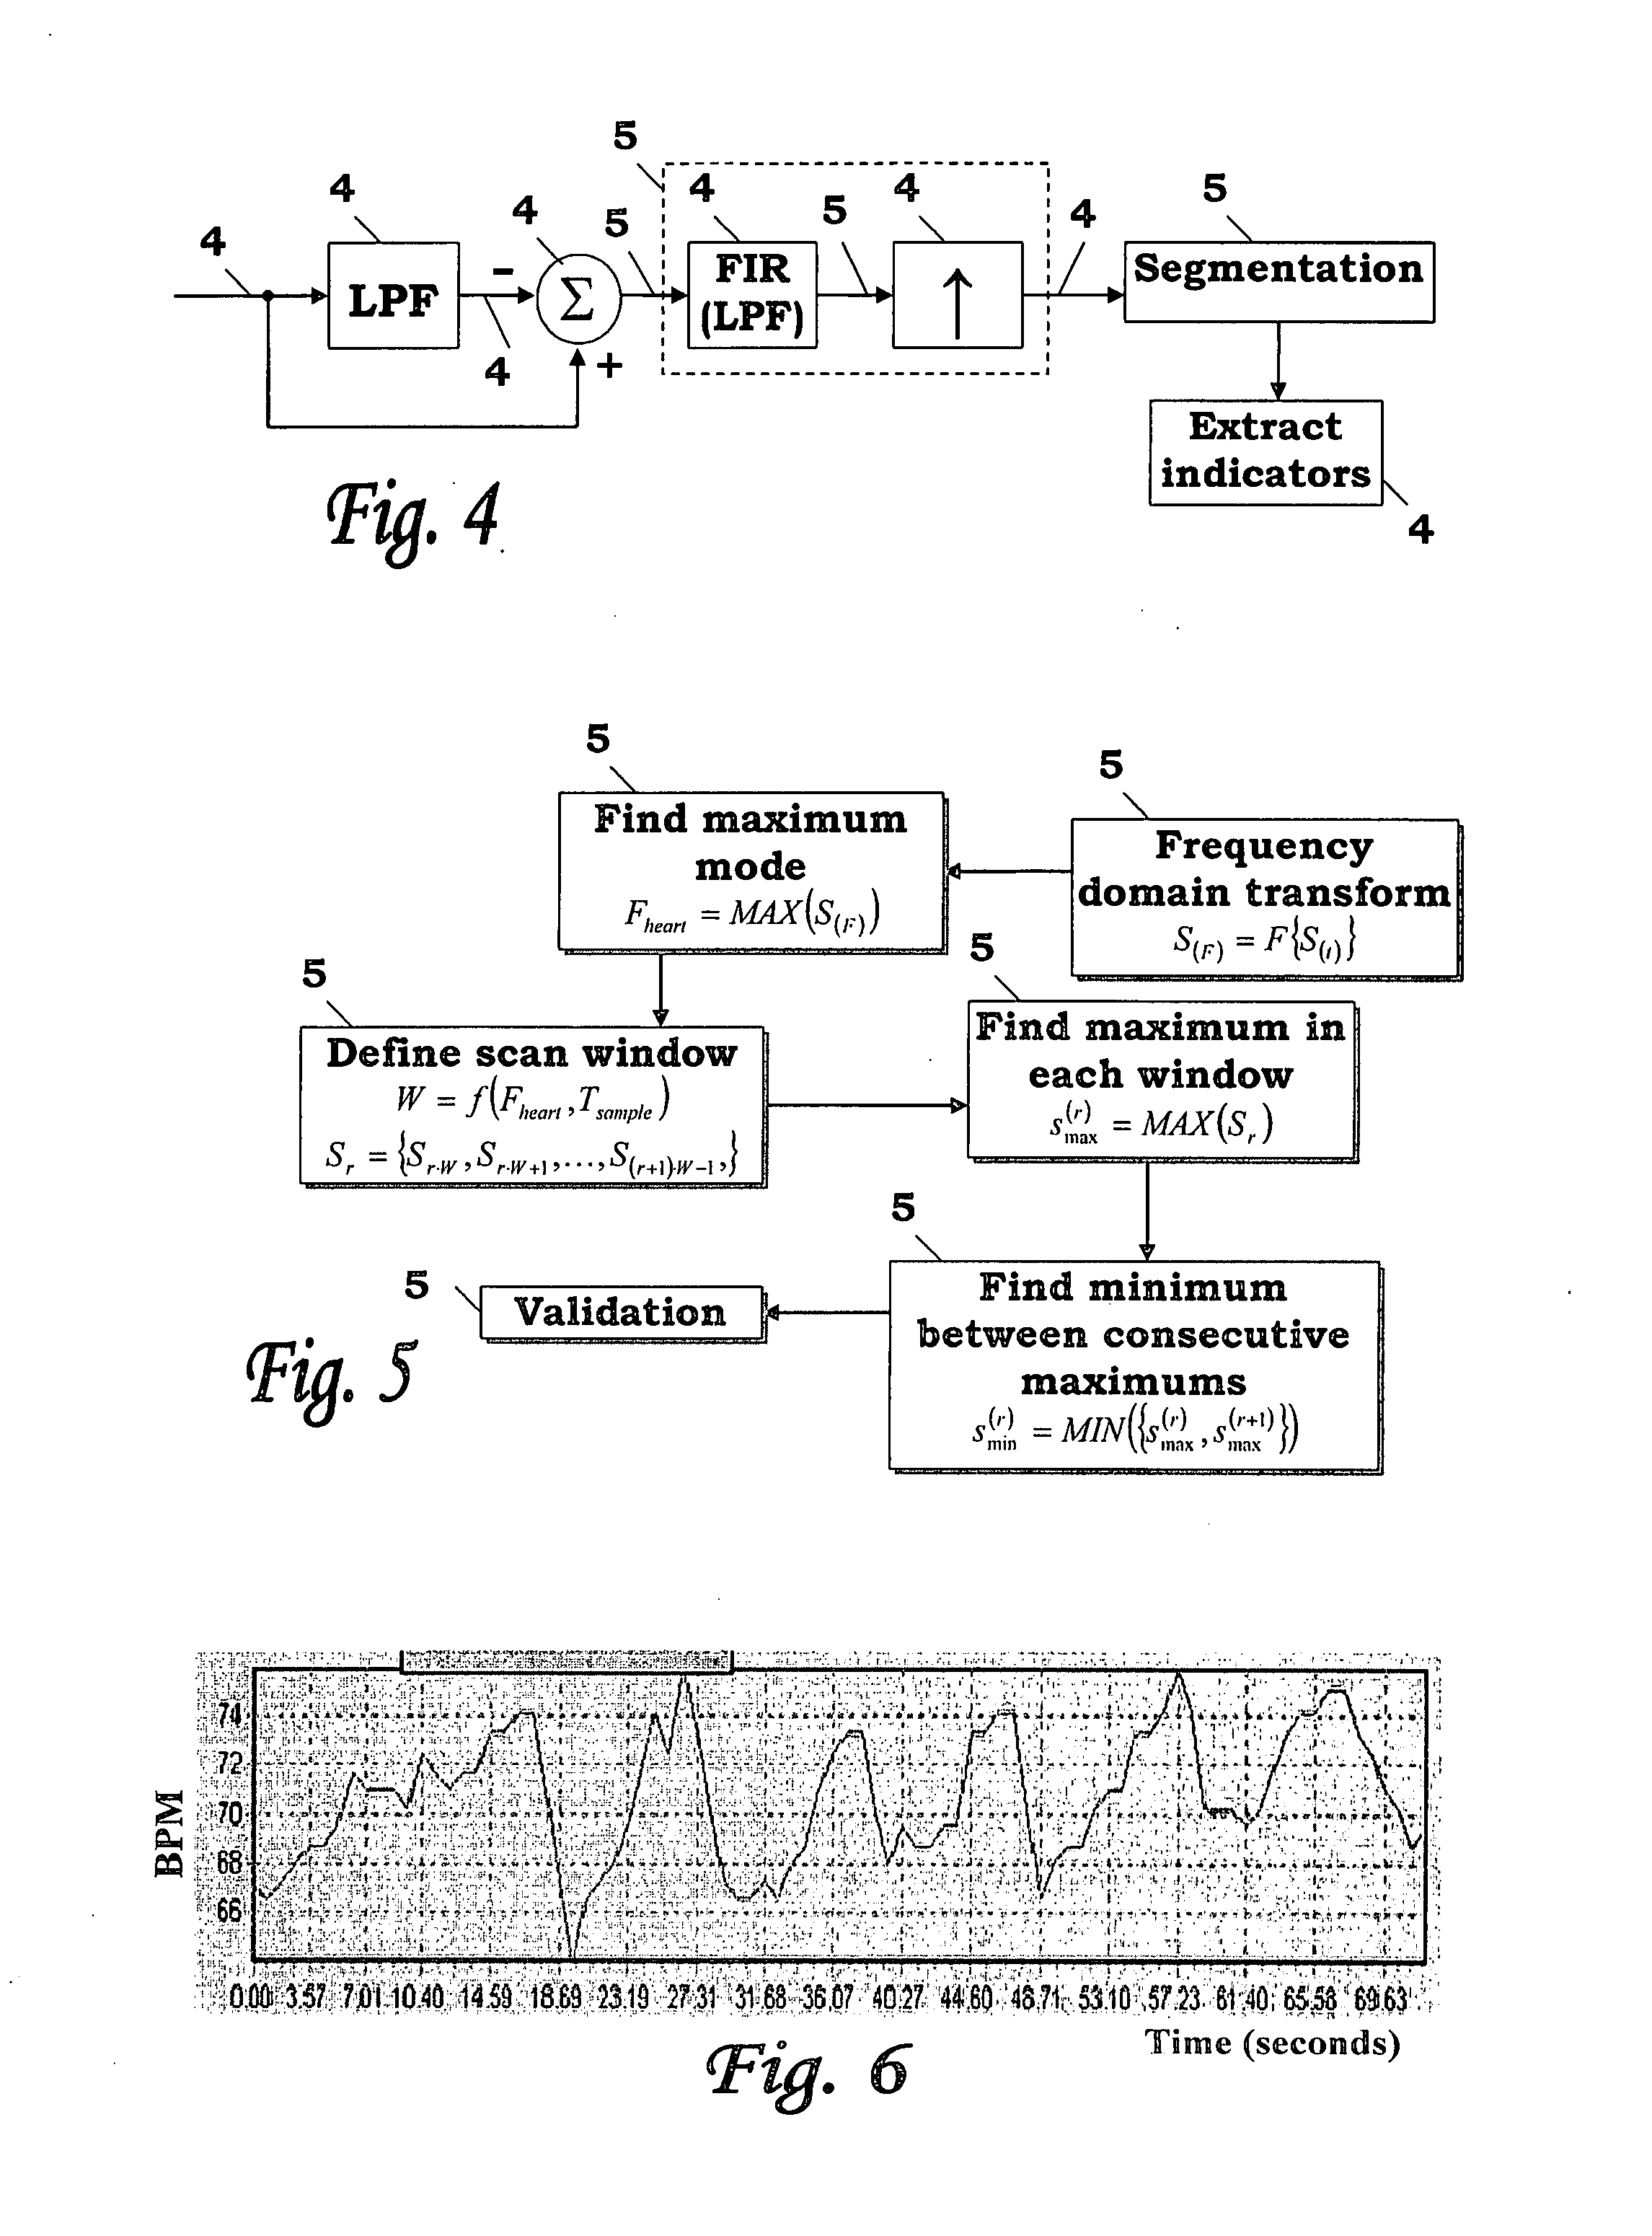 Method and system for cardiovascular system diagnosis